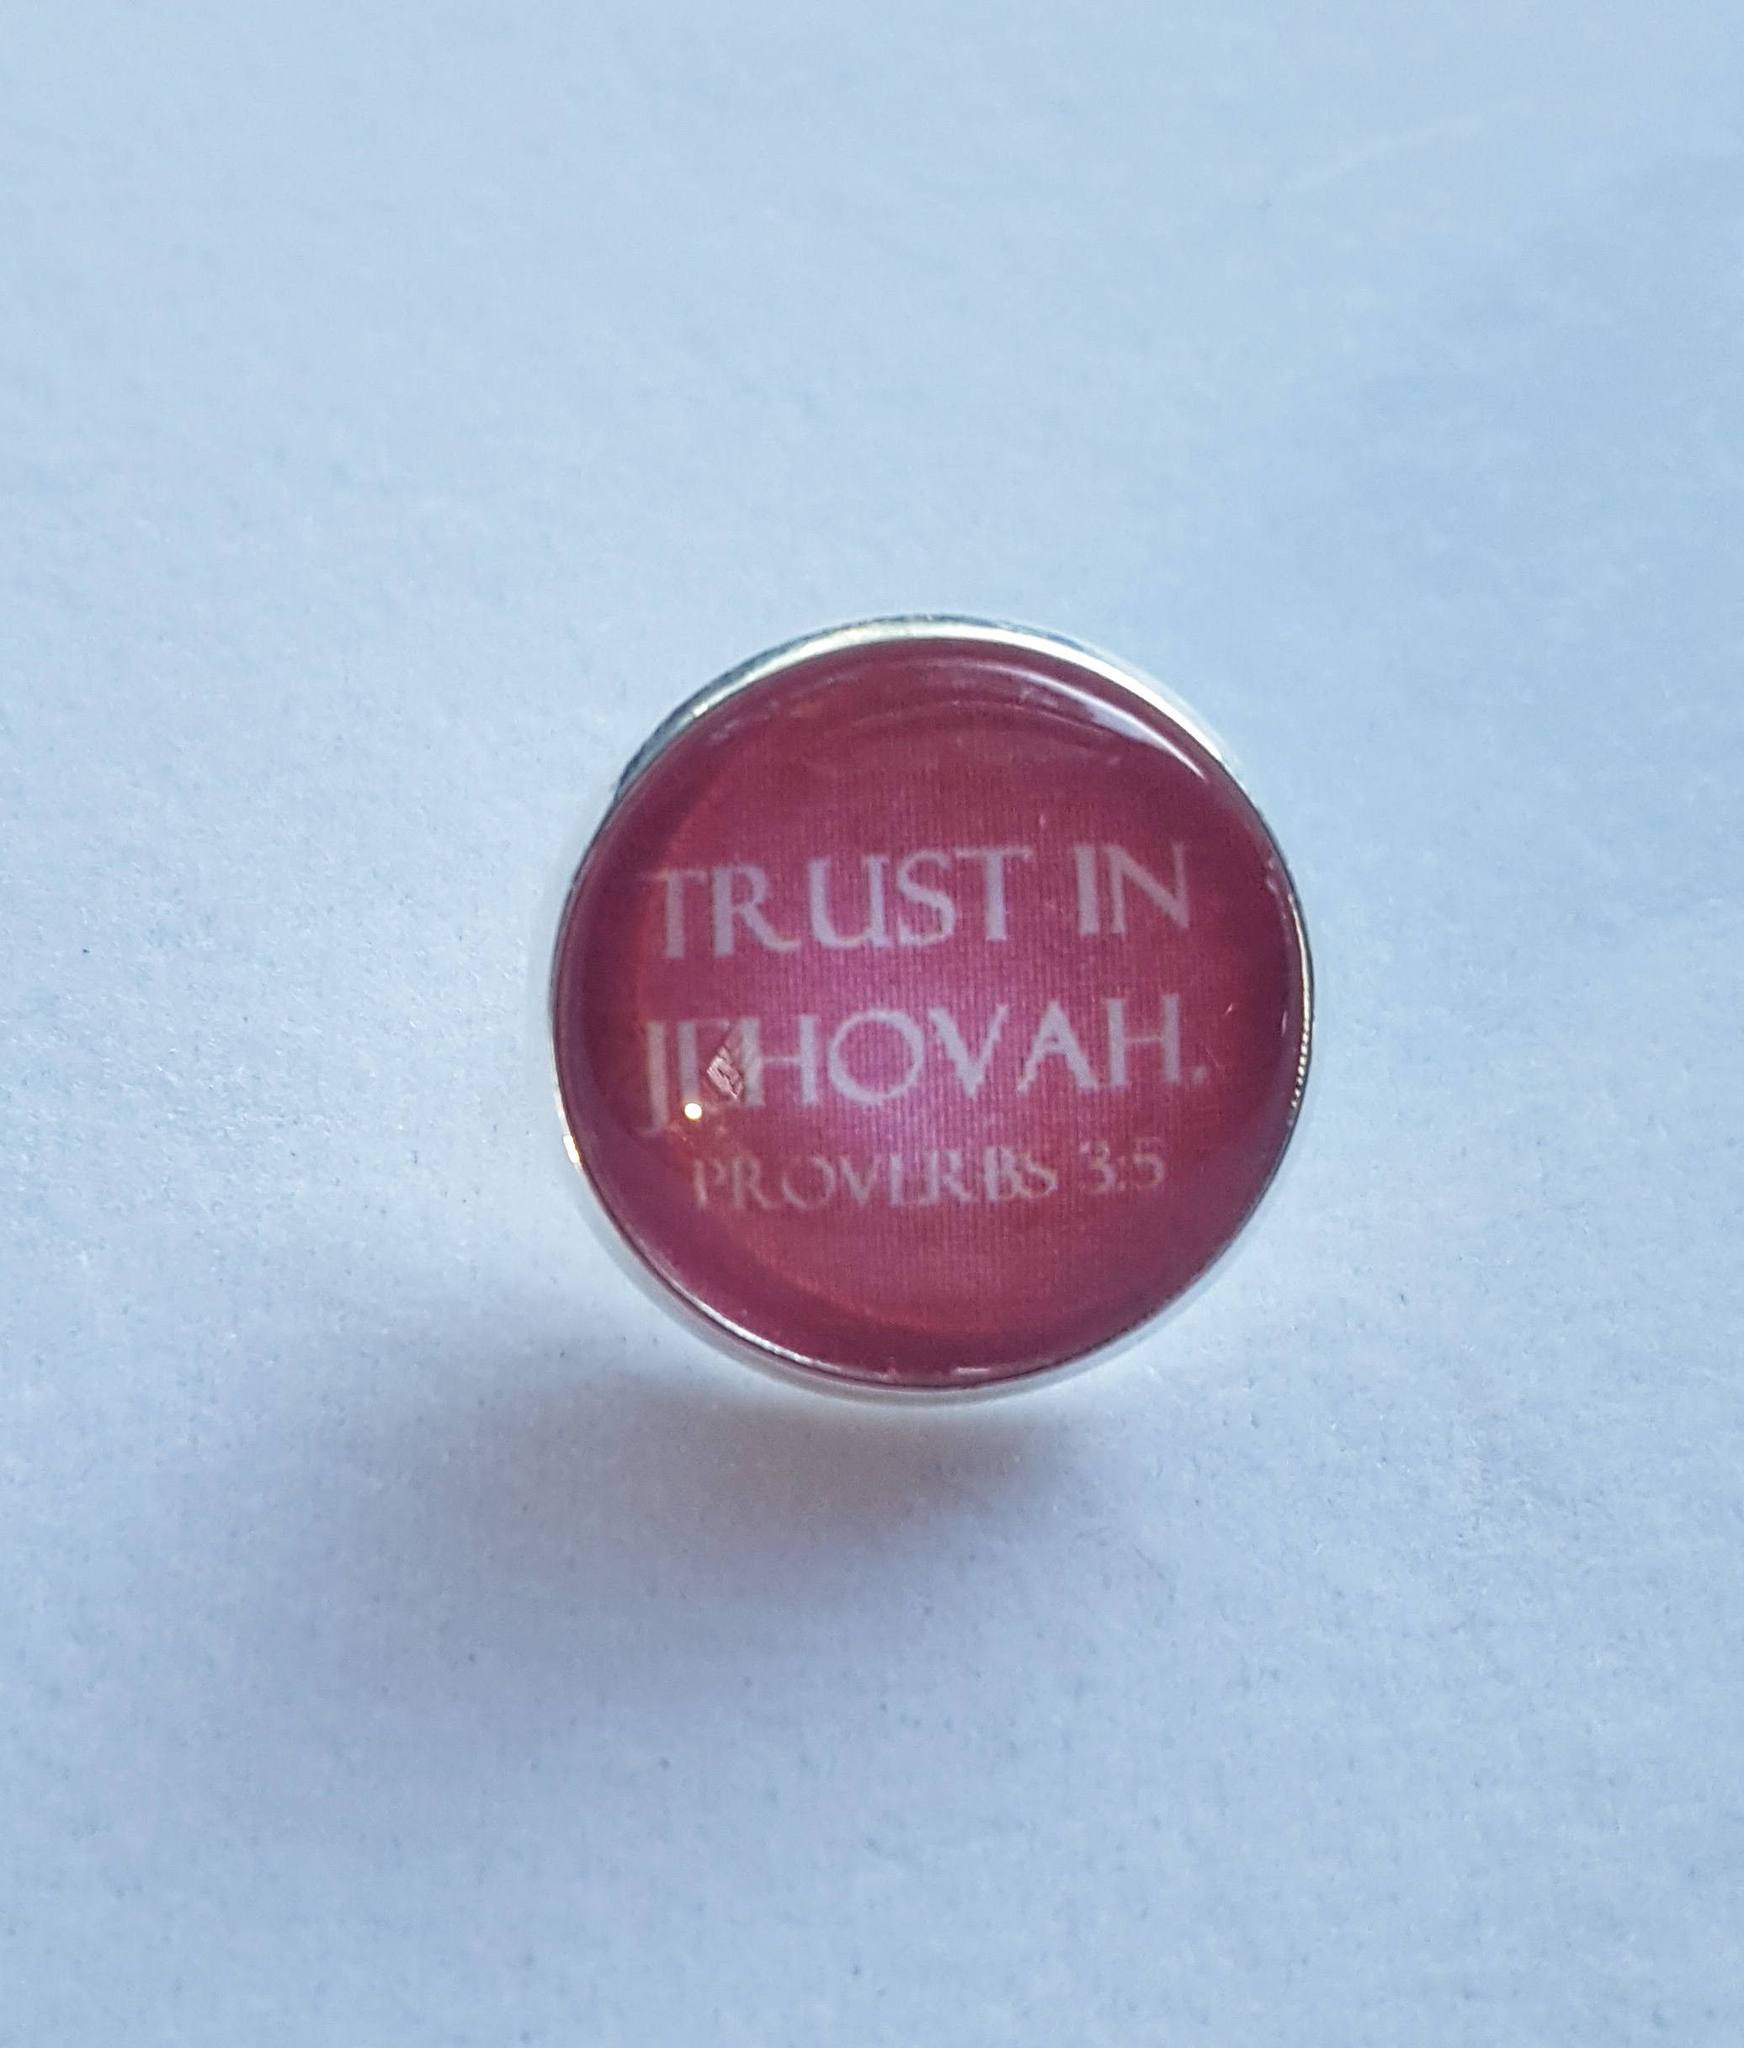 Shiny Silver Tie Tac Trust In Jehovah On Burgundy Background Jw